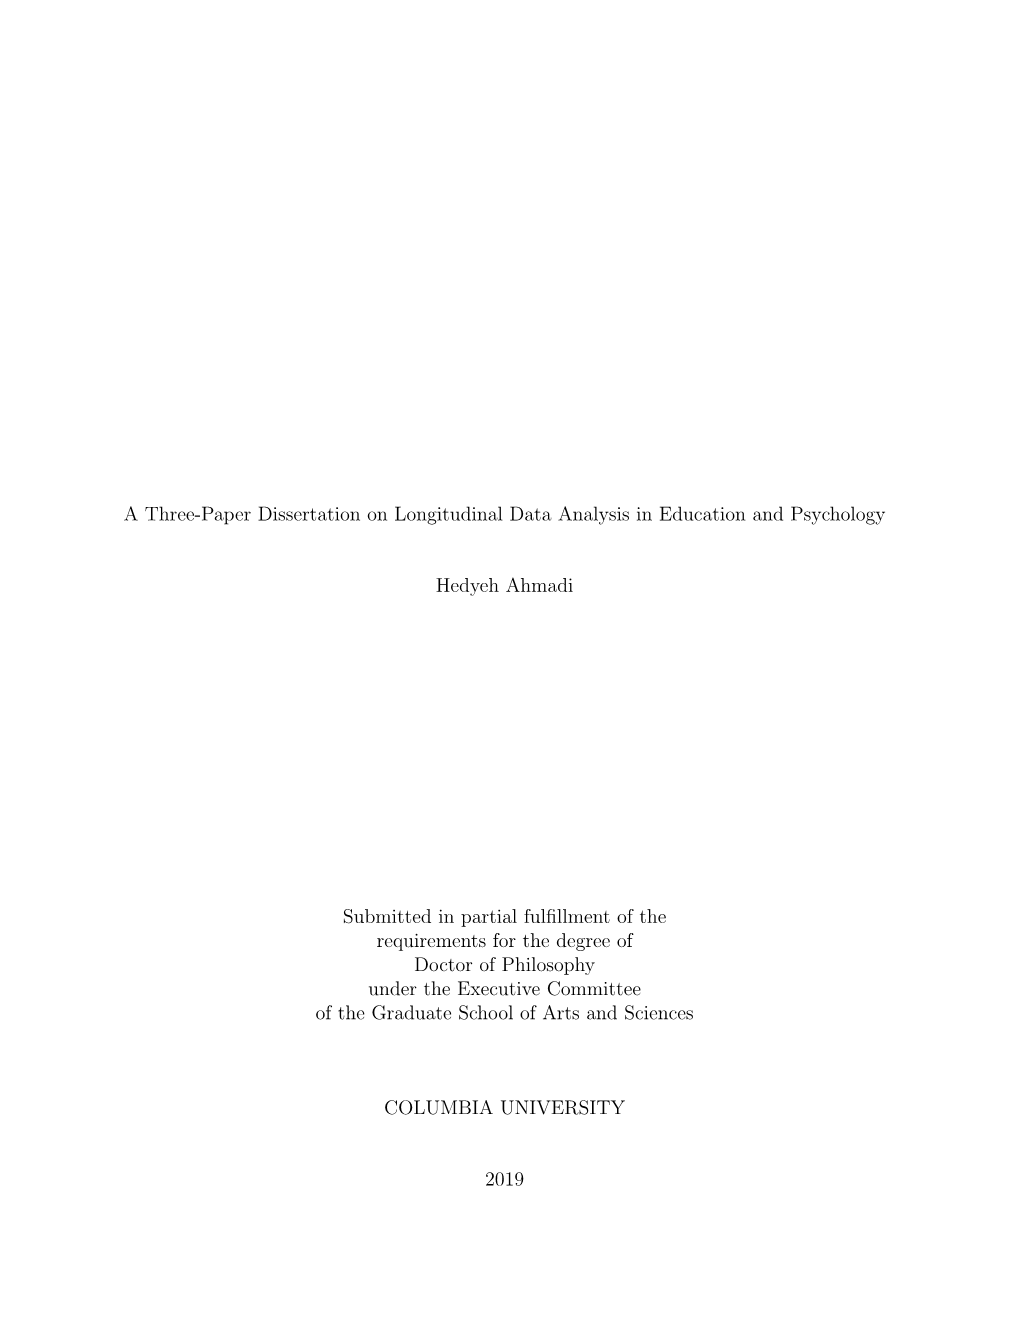 A Three-Paper Dissertation on Longitudinal Data Analysis in Education and Psychology